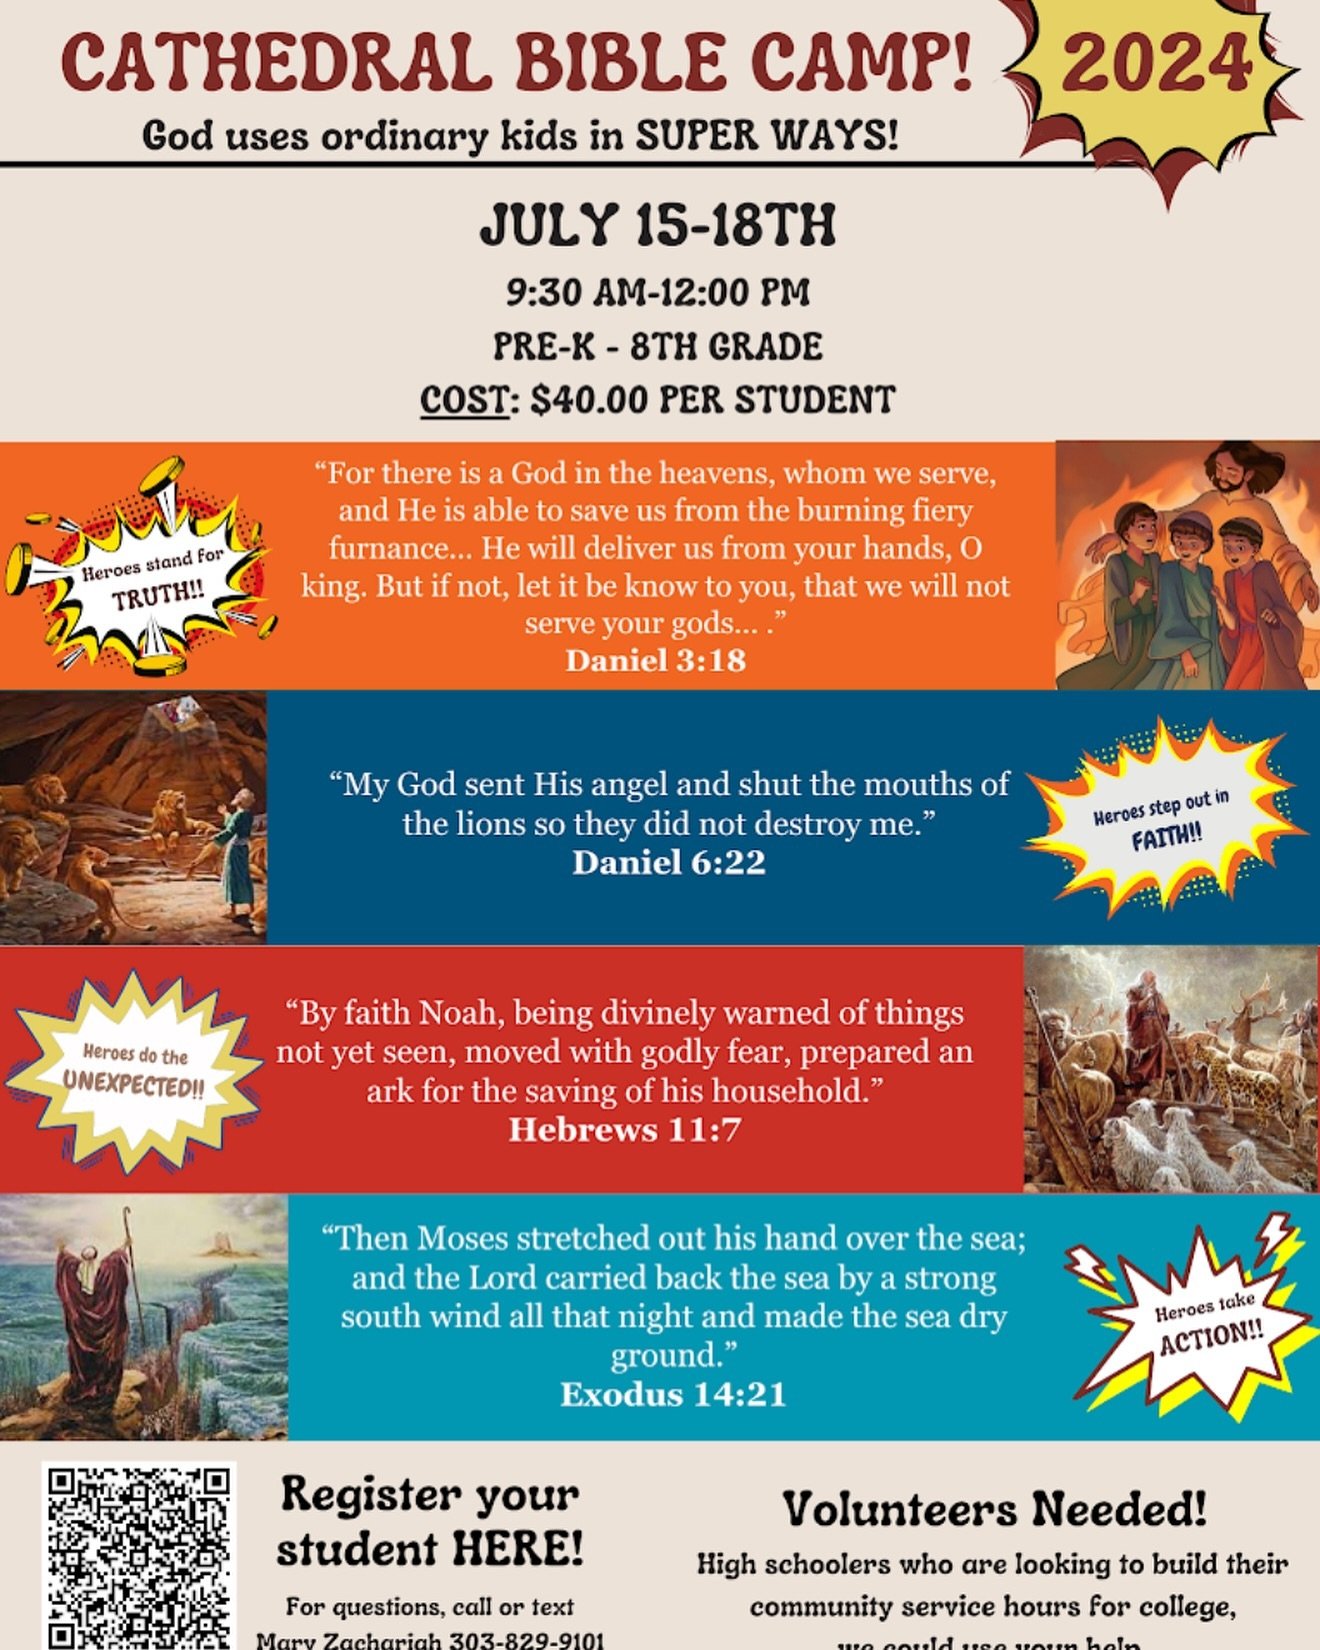 We are excited to announce Cathedral Bible Camp being held July 15 - 18! More details available on our website. https://www.assumptioncathedral.org/upcoming-youth-events/cathedral-bible-camp-july-15-18